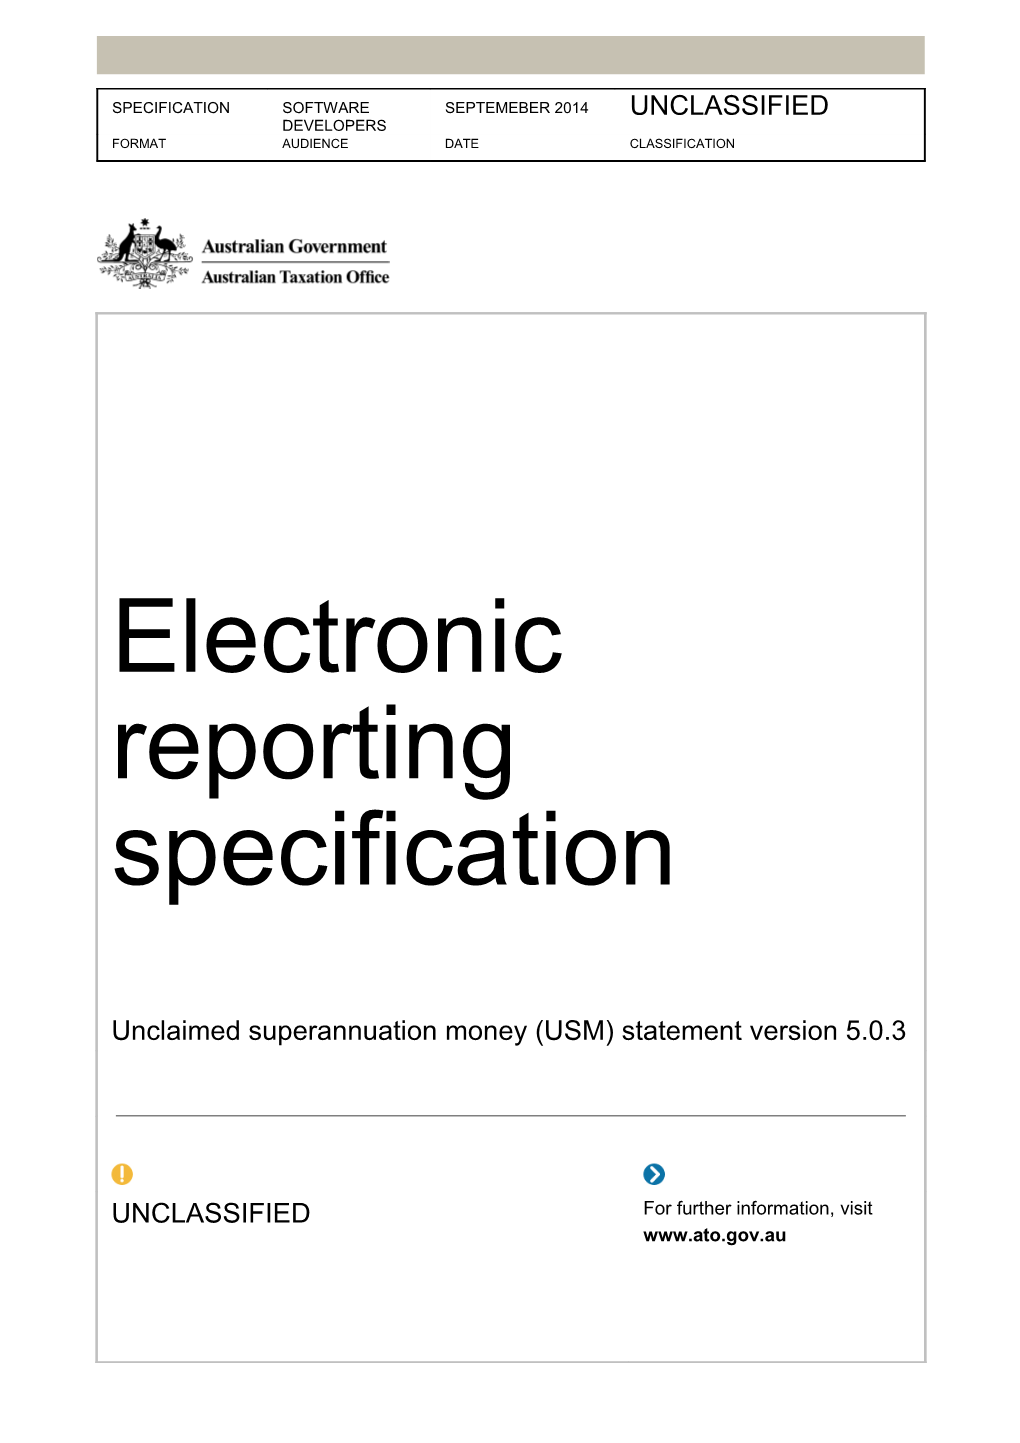 Electronic Reporting Specification - Unclaimed Superannuation Money